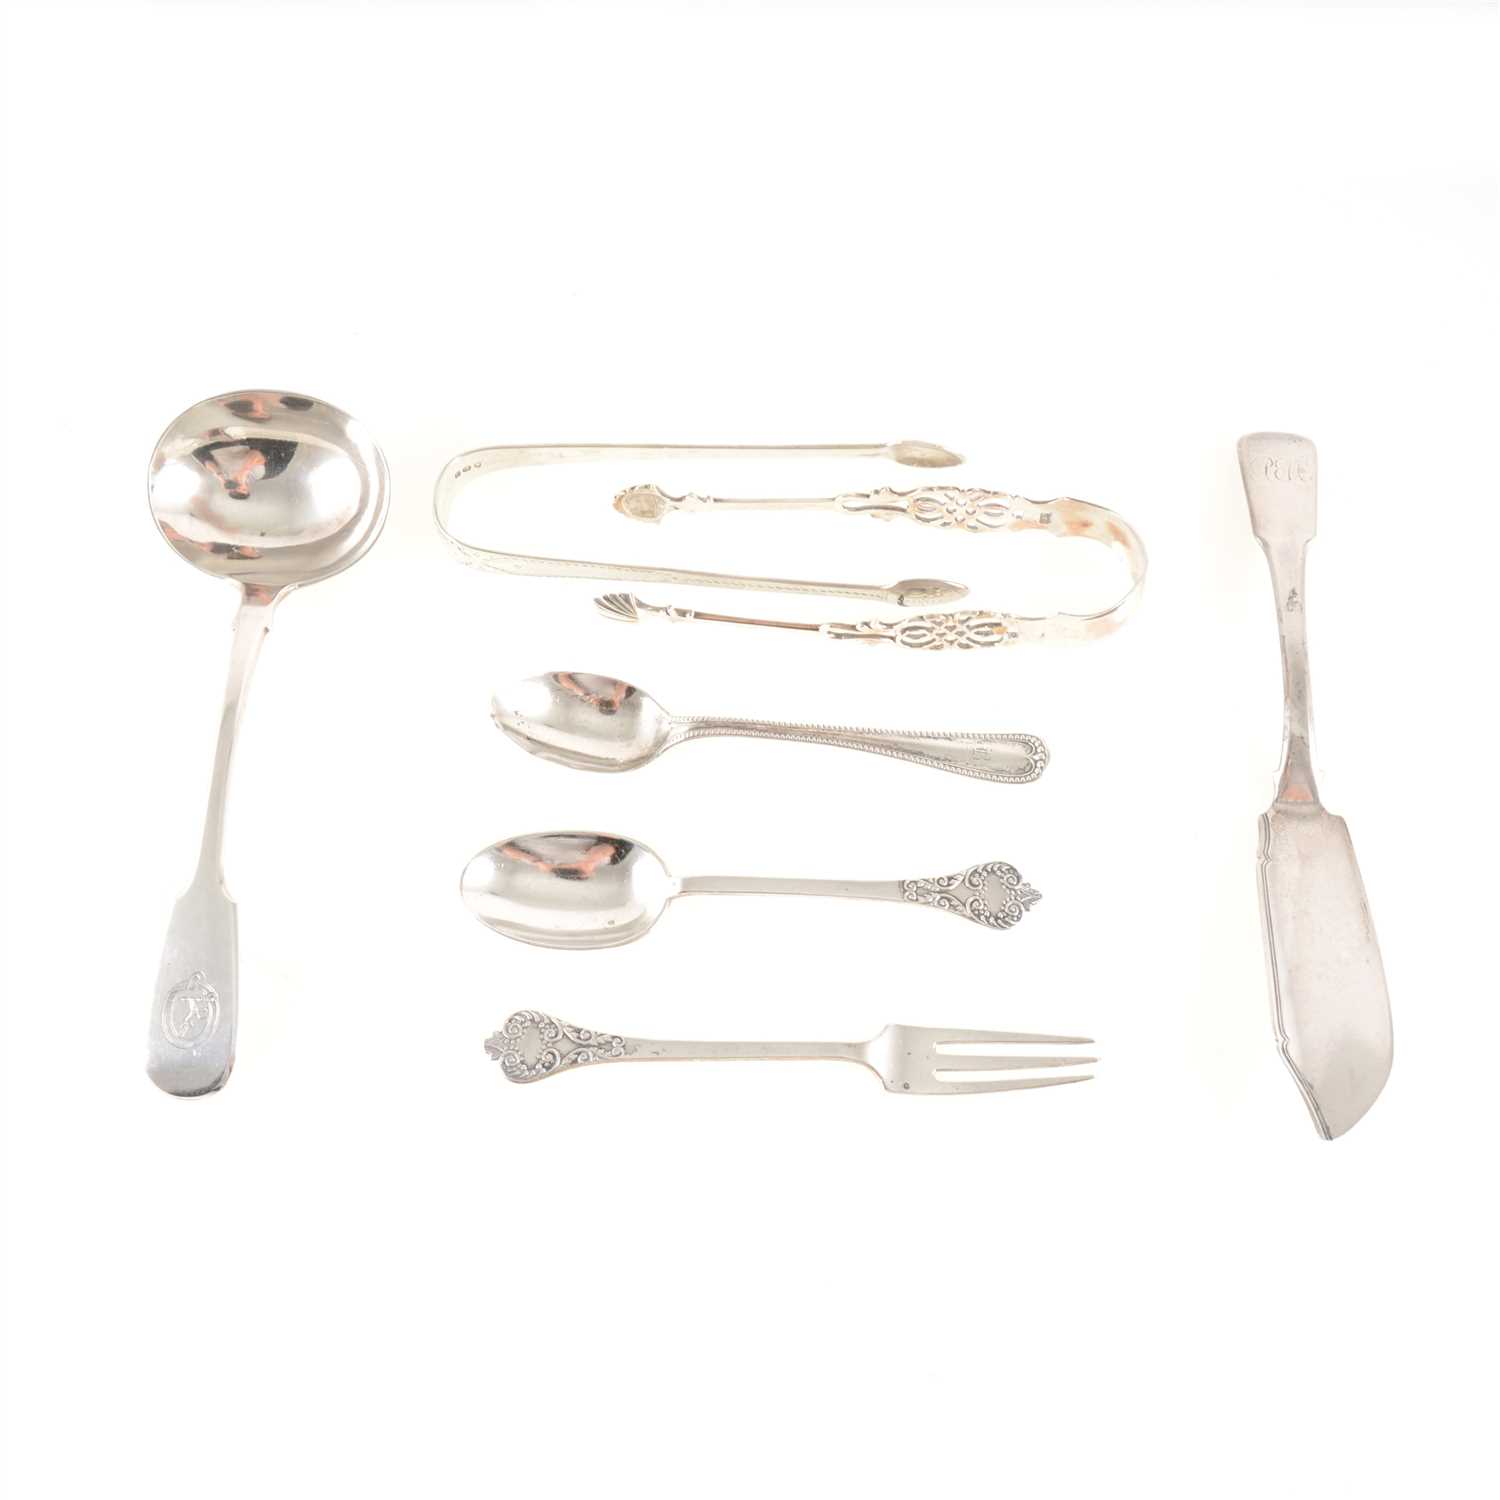 Lot 191 - Silver spoon and fork set by Thomas Bradbury & Sons, Sheffield 1918, a cased spoon, a Victorian Fiddle pattern ladle, a George IV Fiddle pattern butter knife and other items of silver cutlery